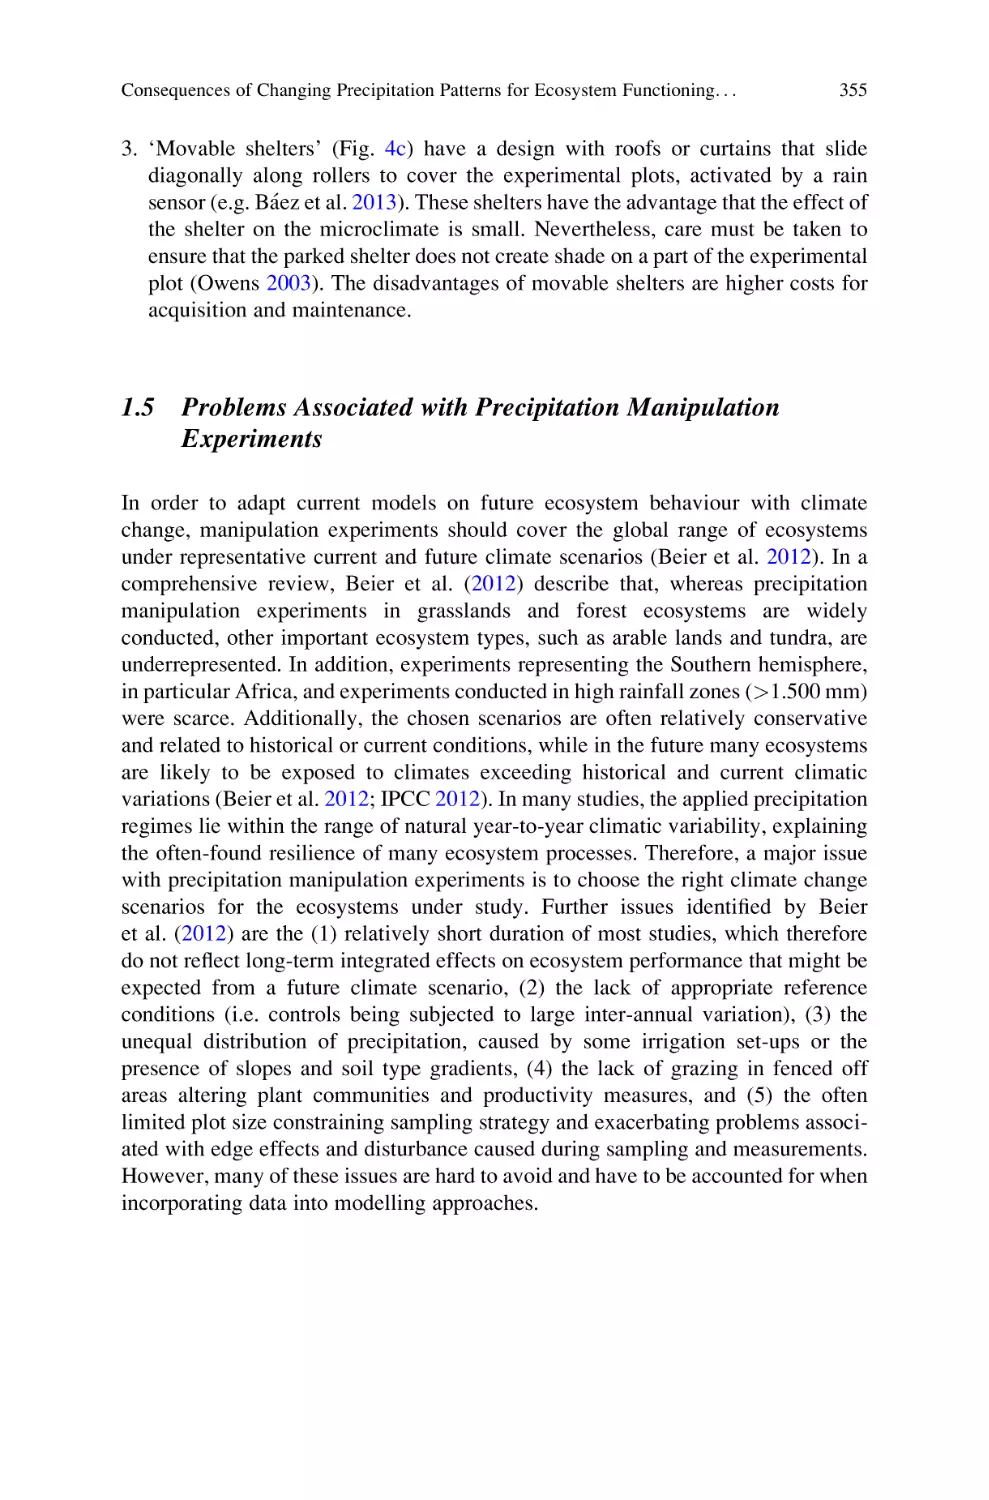 1.5 Problems Associated with Precipitation Manipulation Experiments